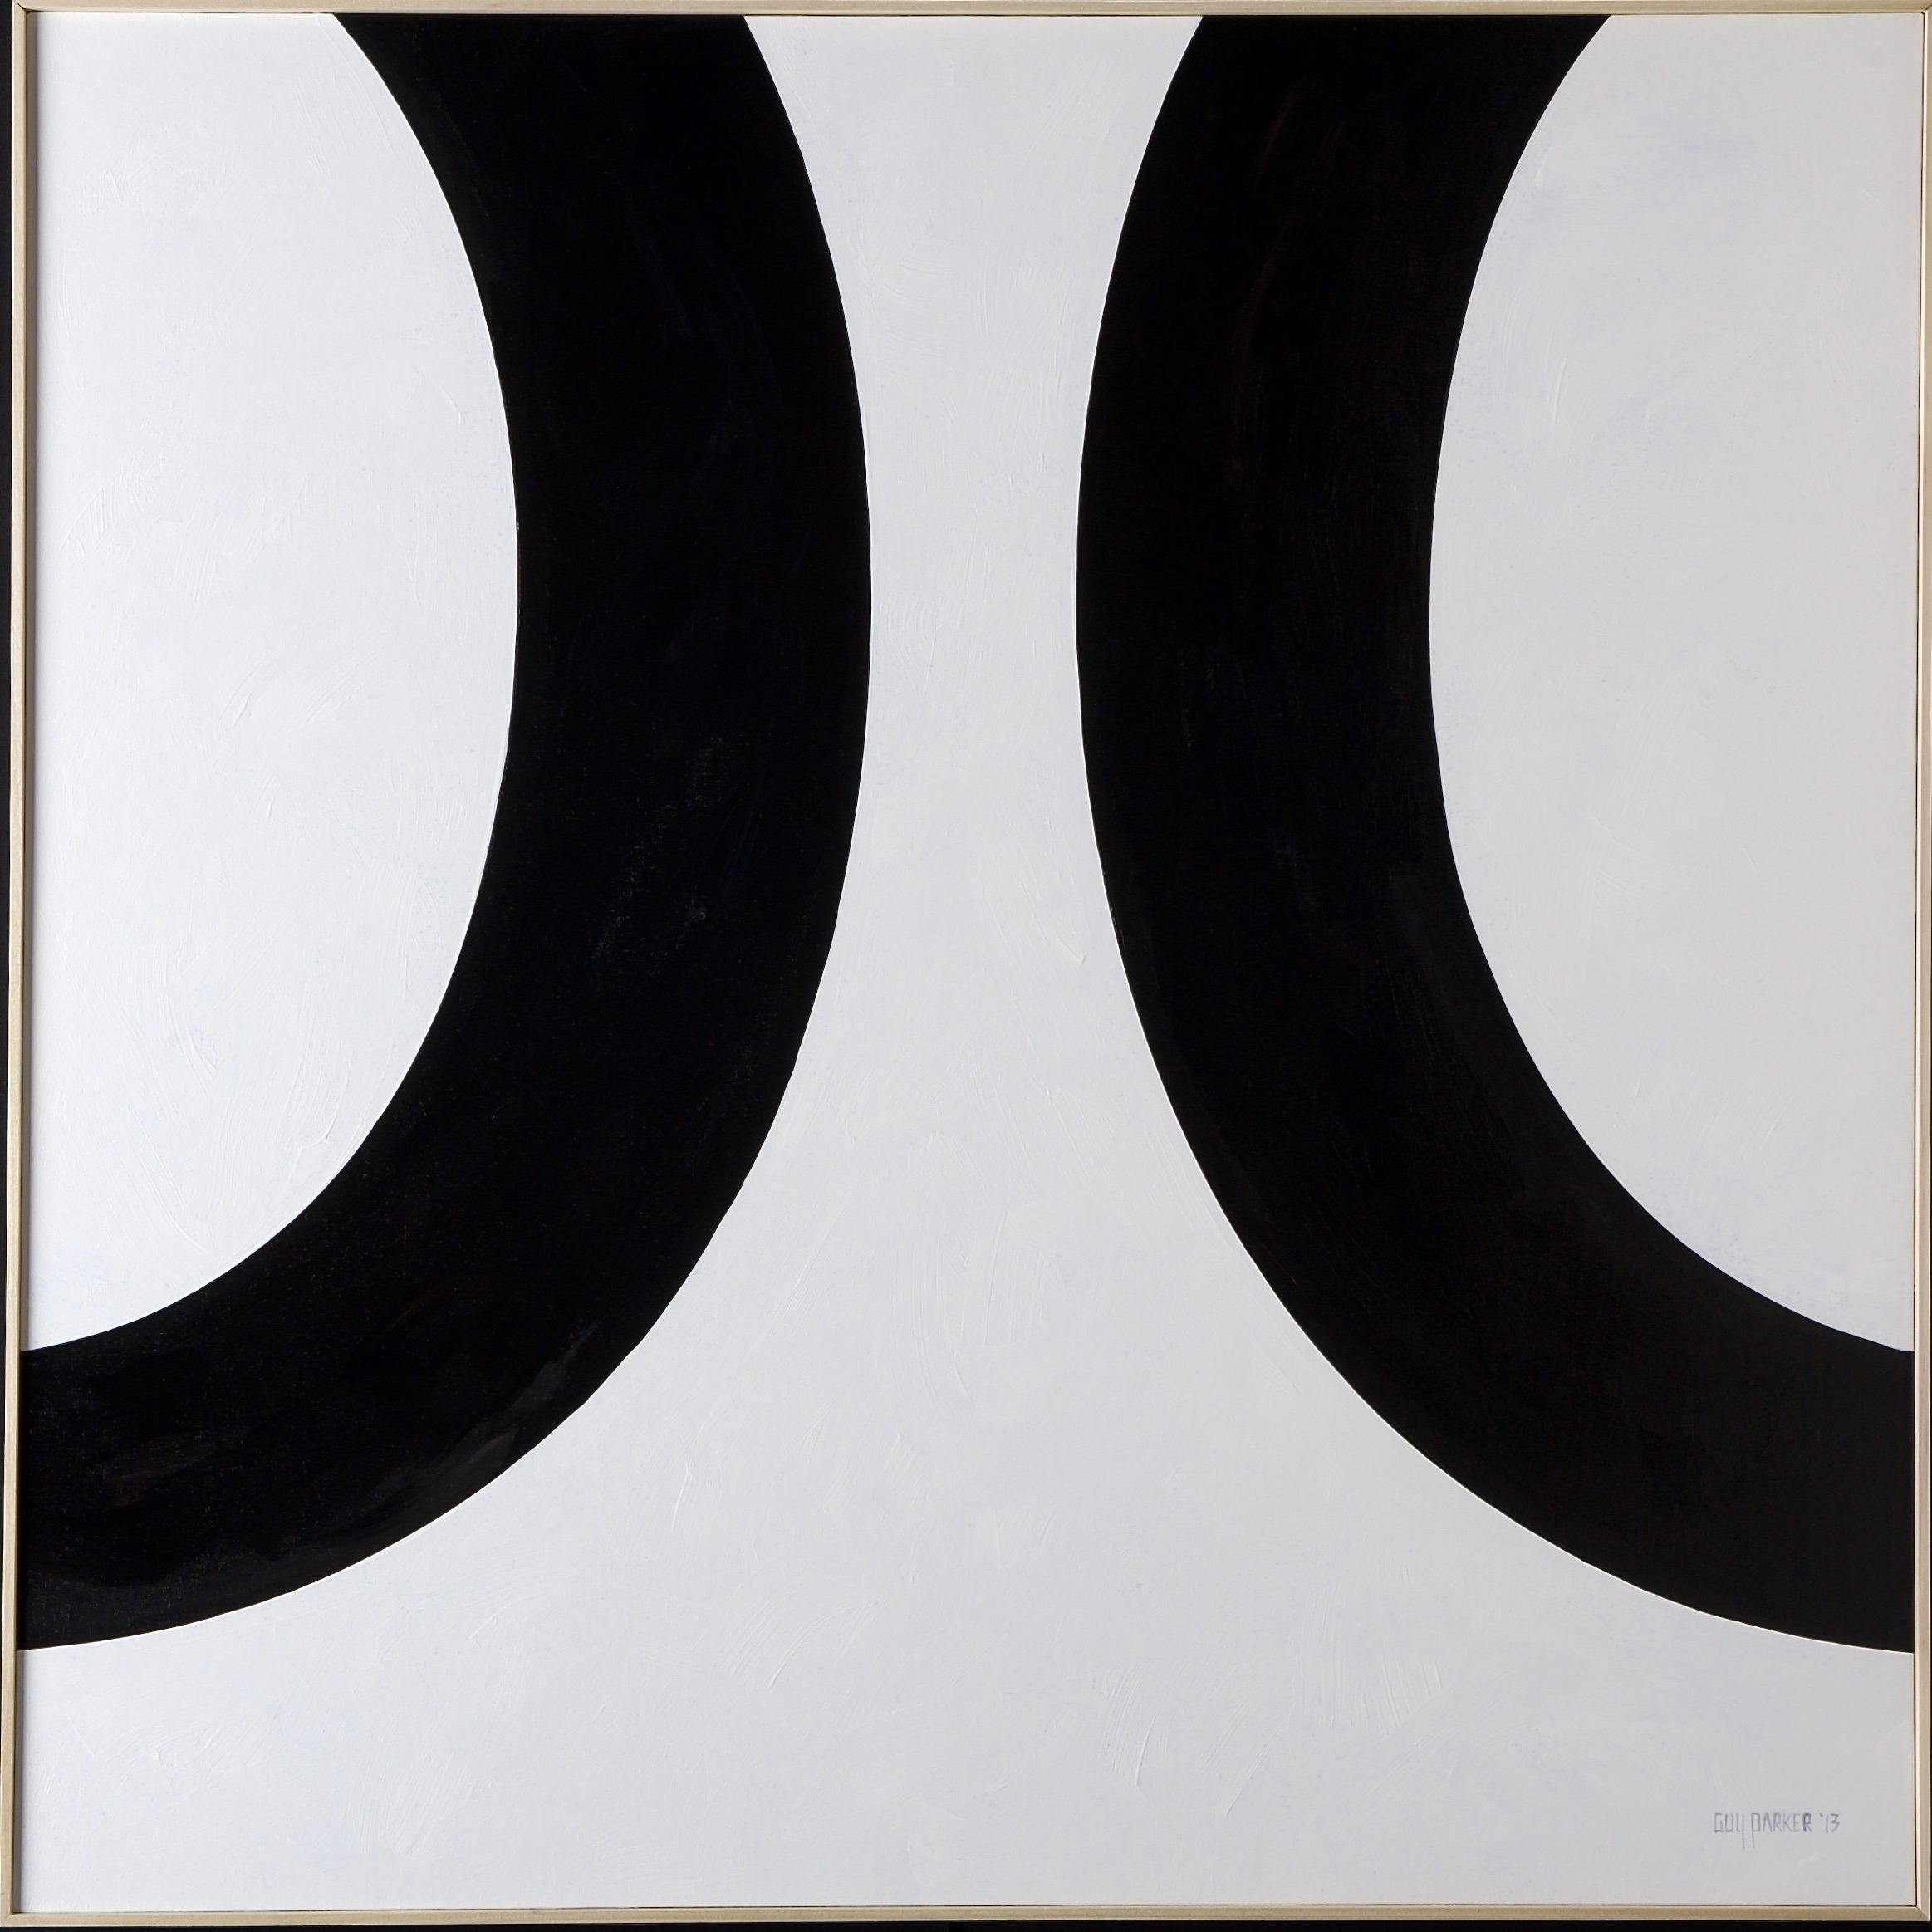 Letters "pq" acrylic on canvas board 40x40